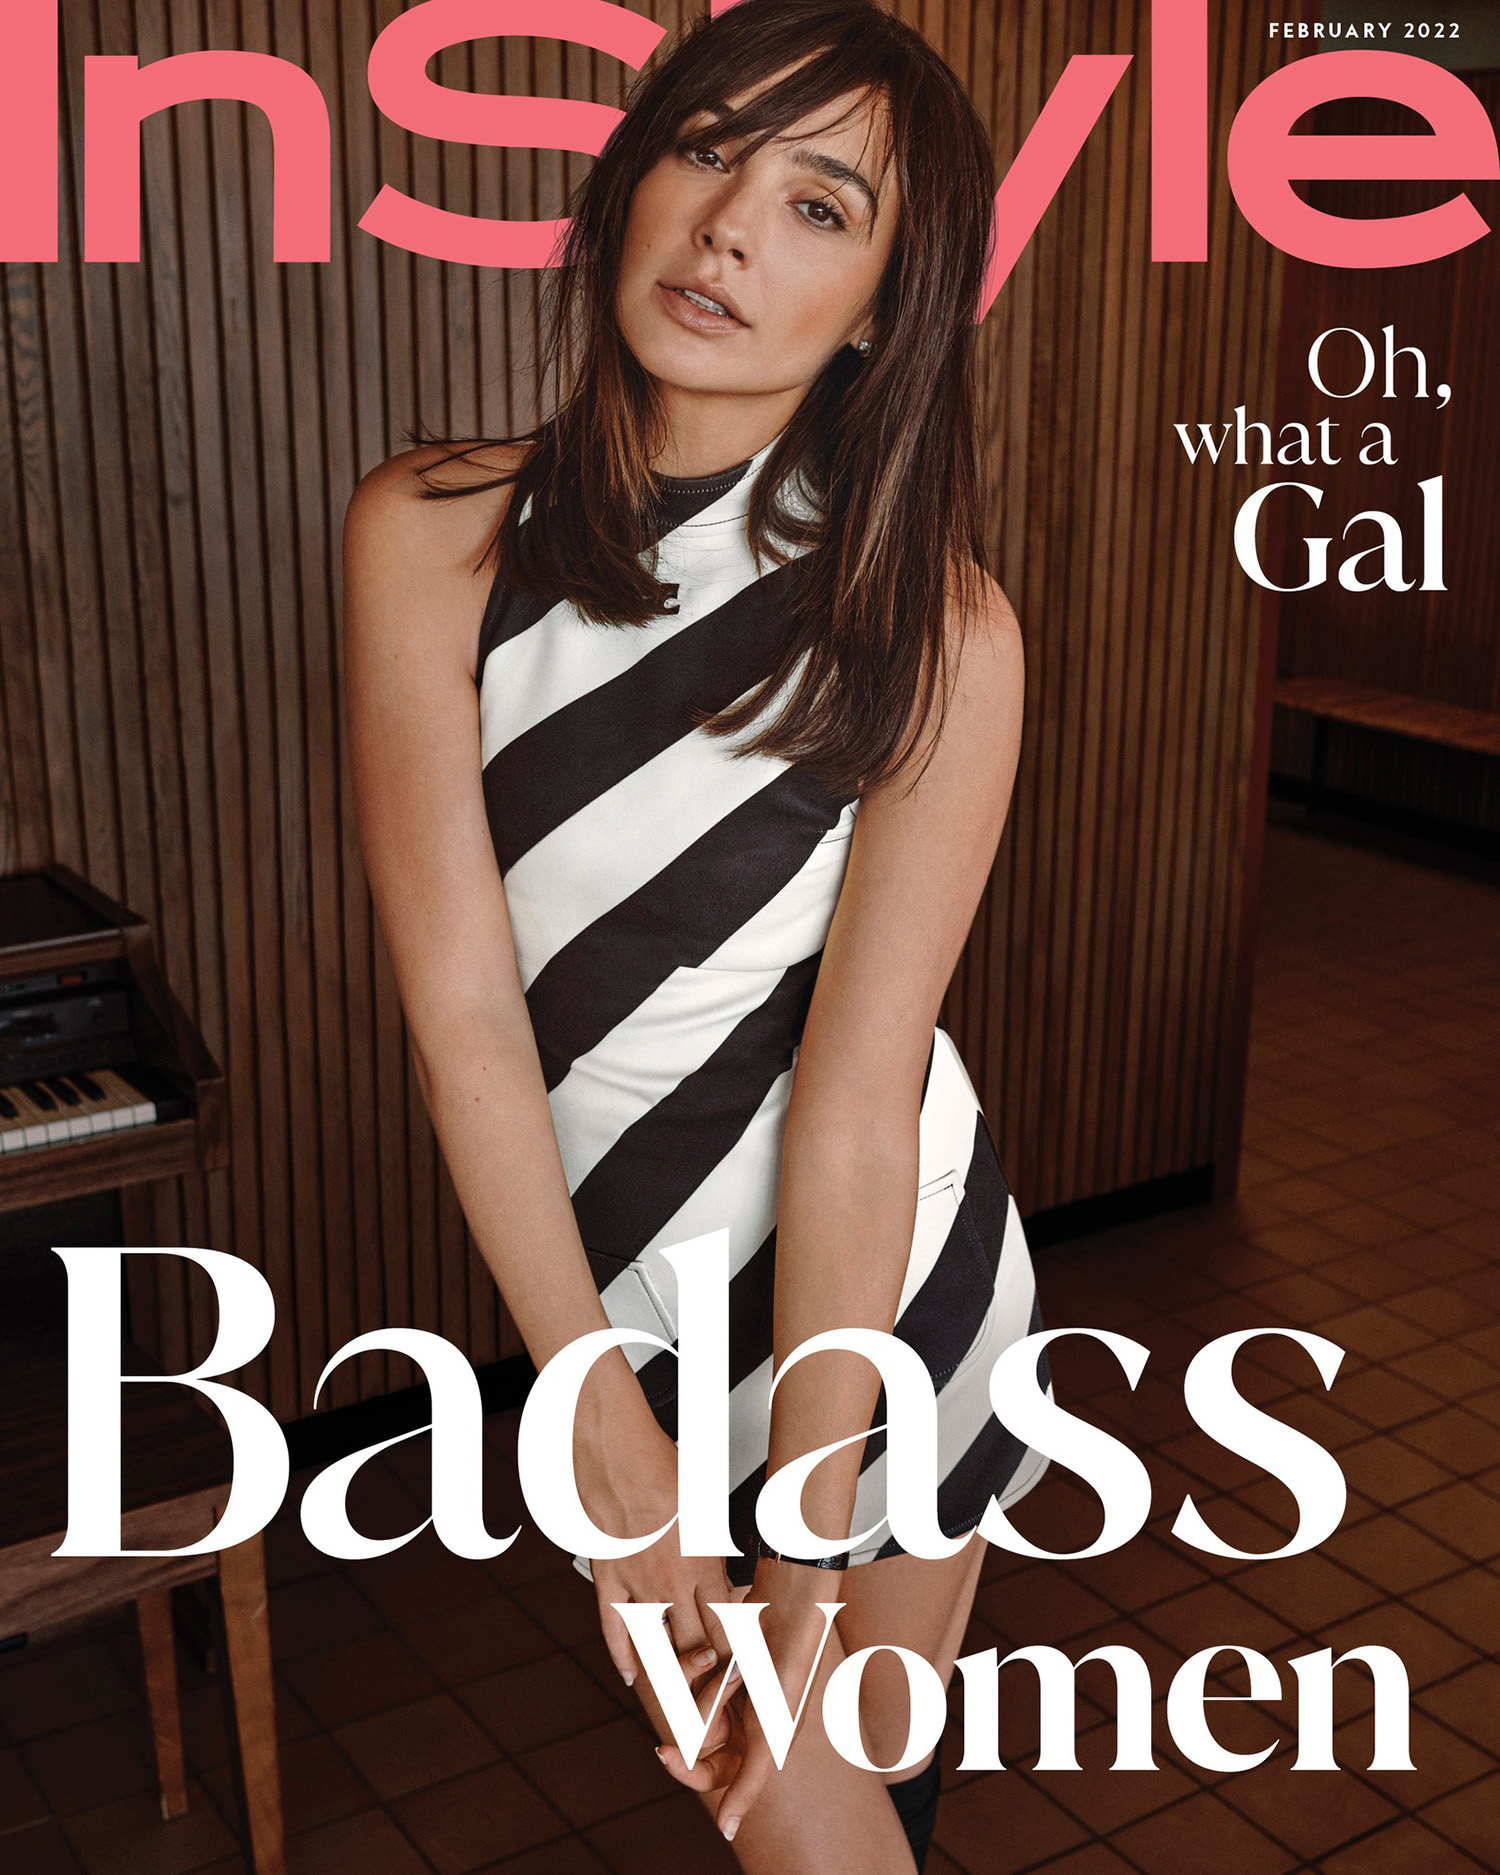 Gal Gadot covers InStyle US February 2022 by Giampaolo Sgura